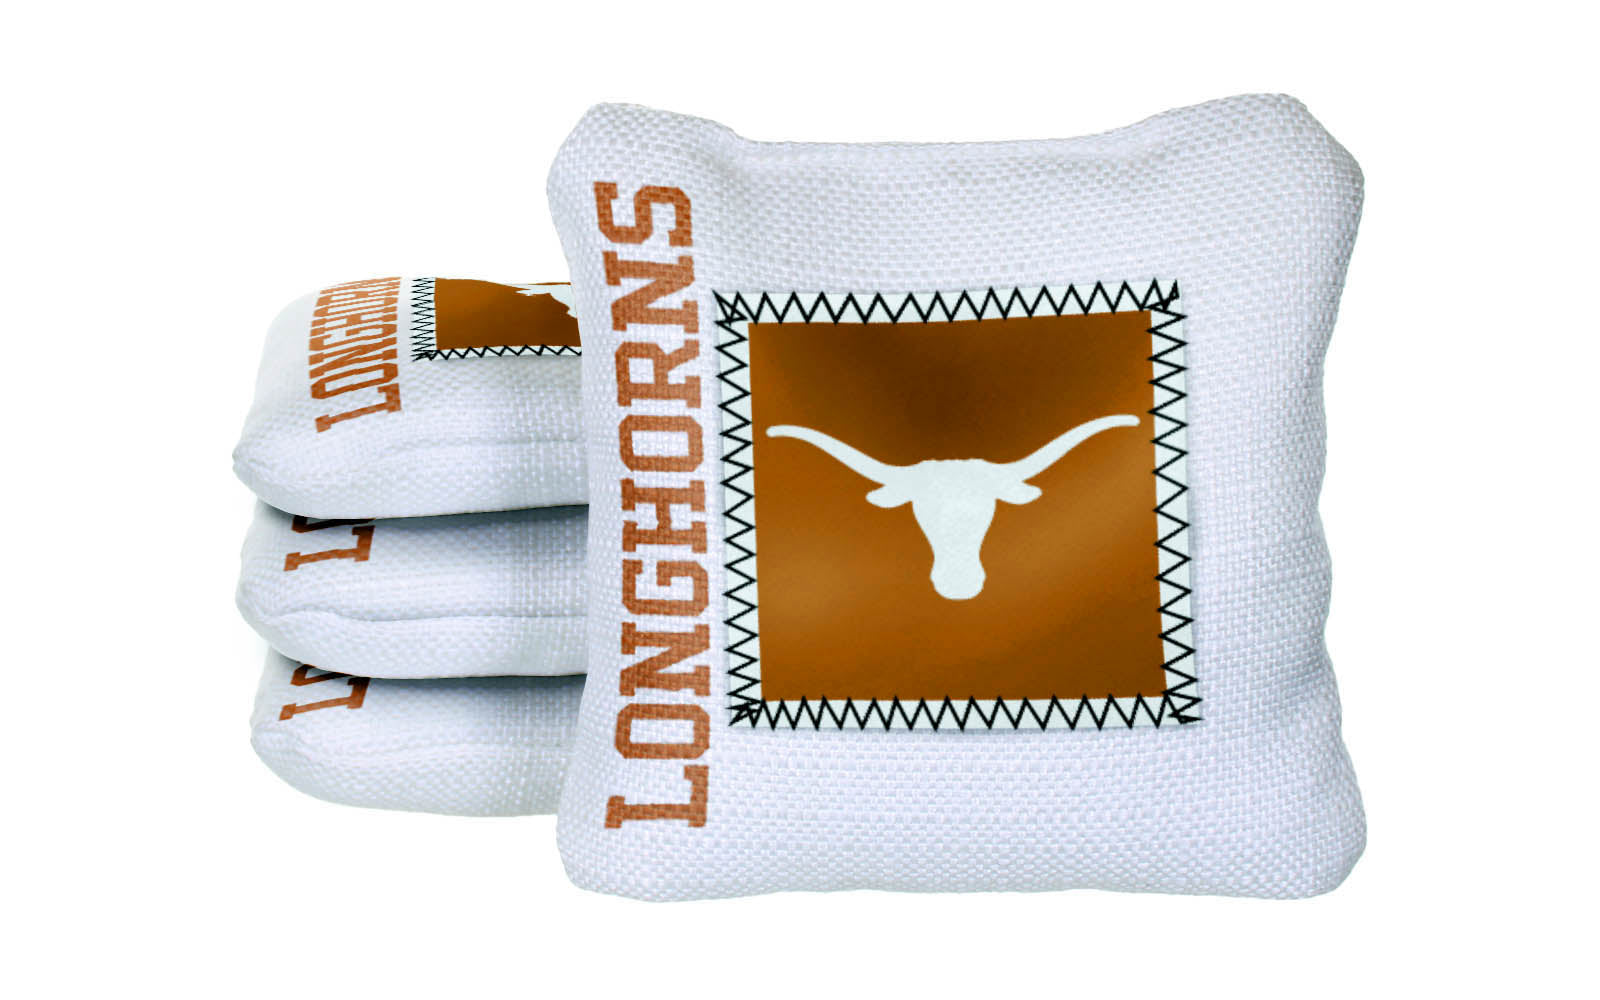 Officially Licensed Collegiate Cornhole Bags - AllCornhole Game Changers - Set of 4 - University of Texas at Austin